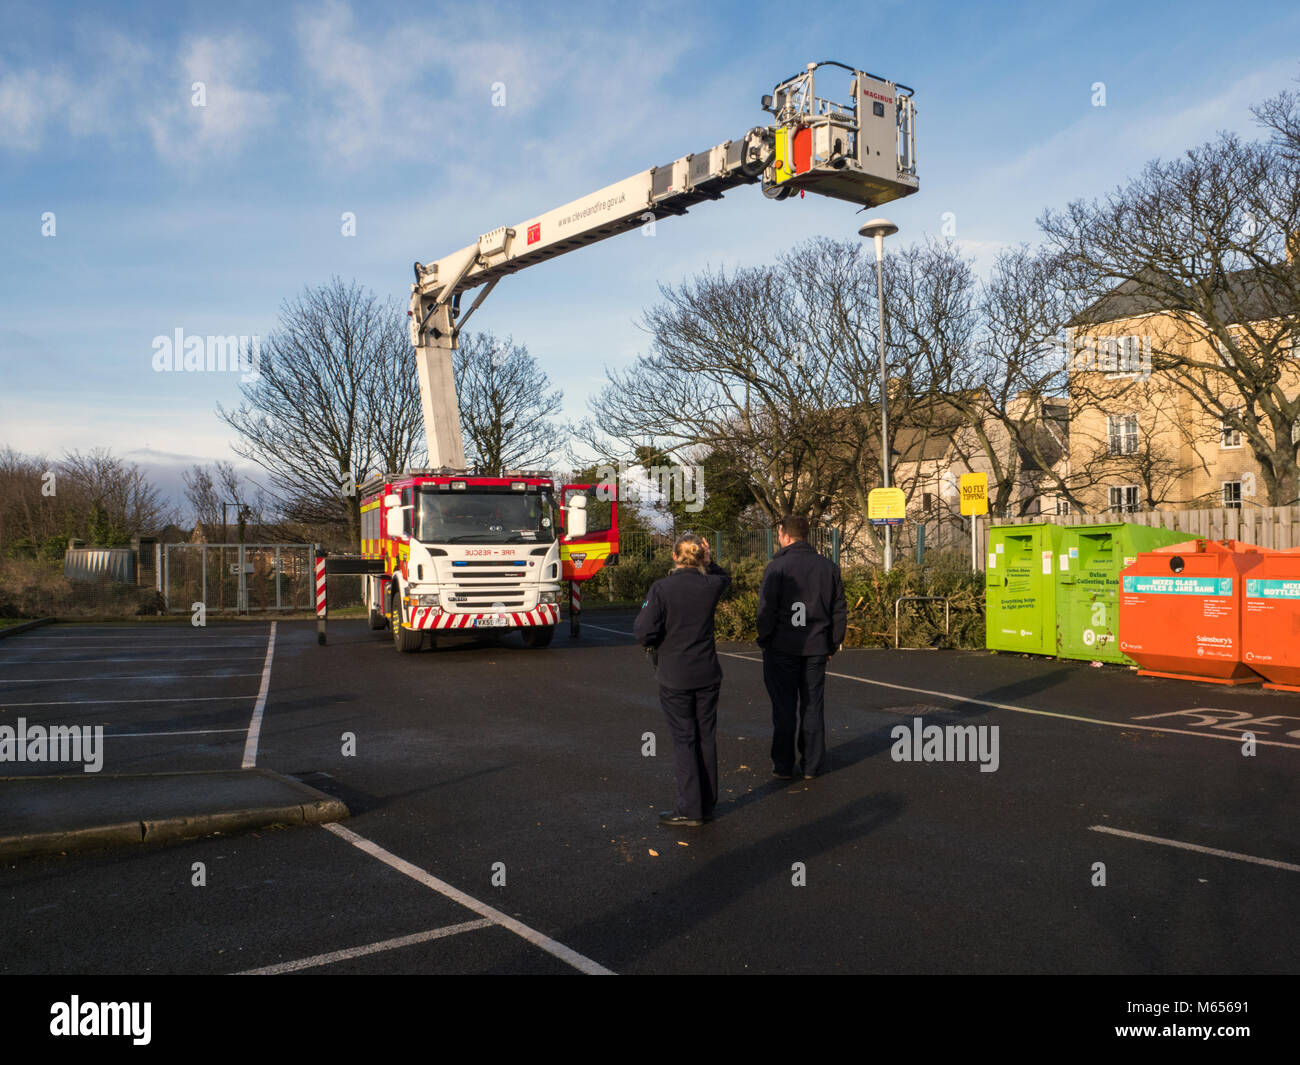 Fire appliance training using a Magirus extending platform fire appliance for evaluating multi-story buildings Stock Photo